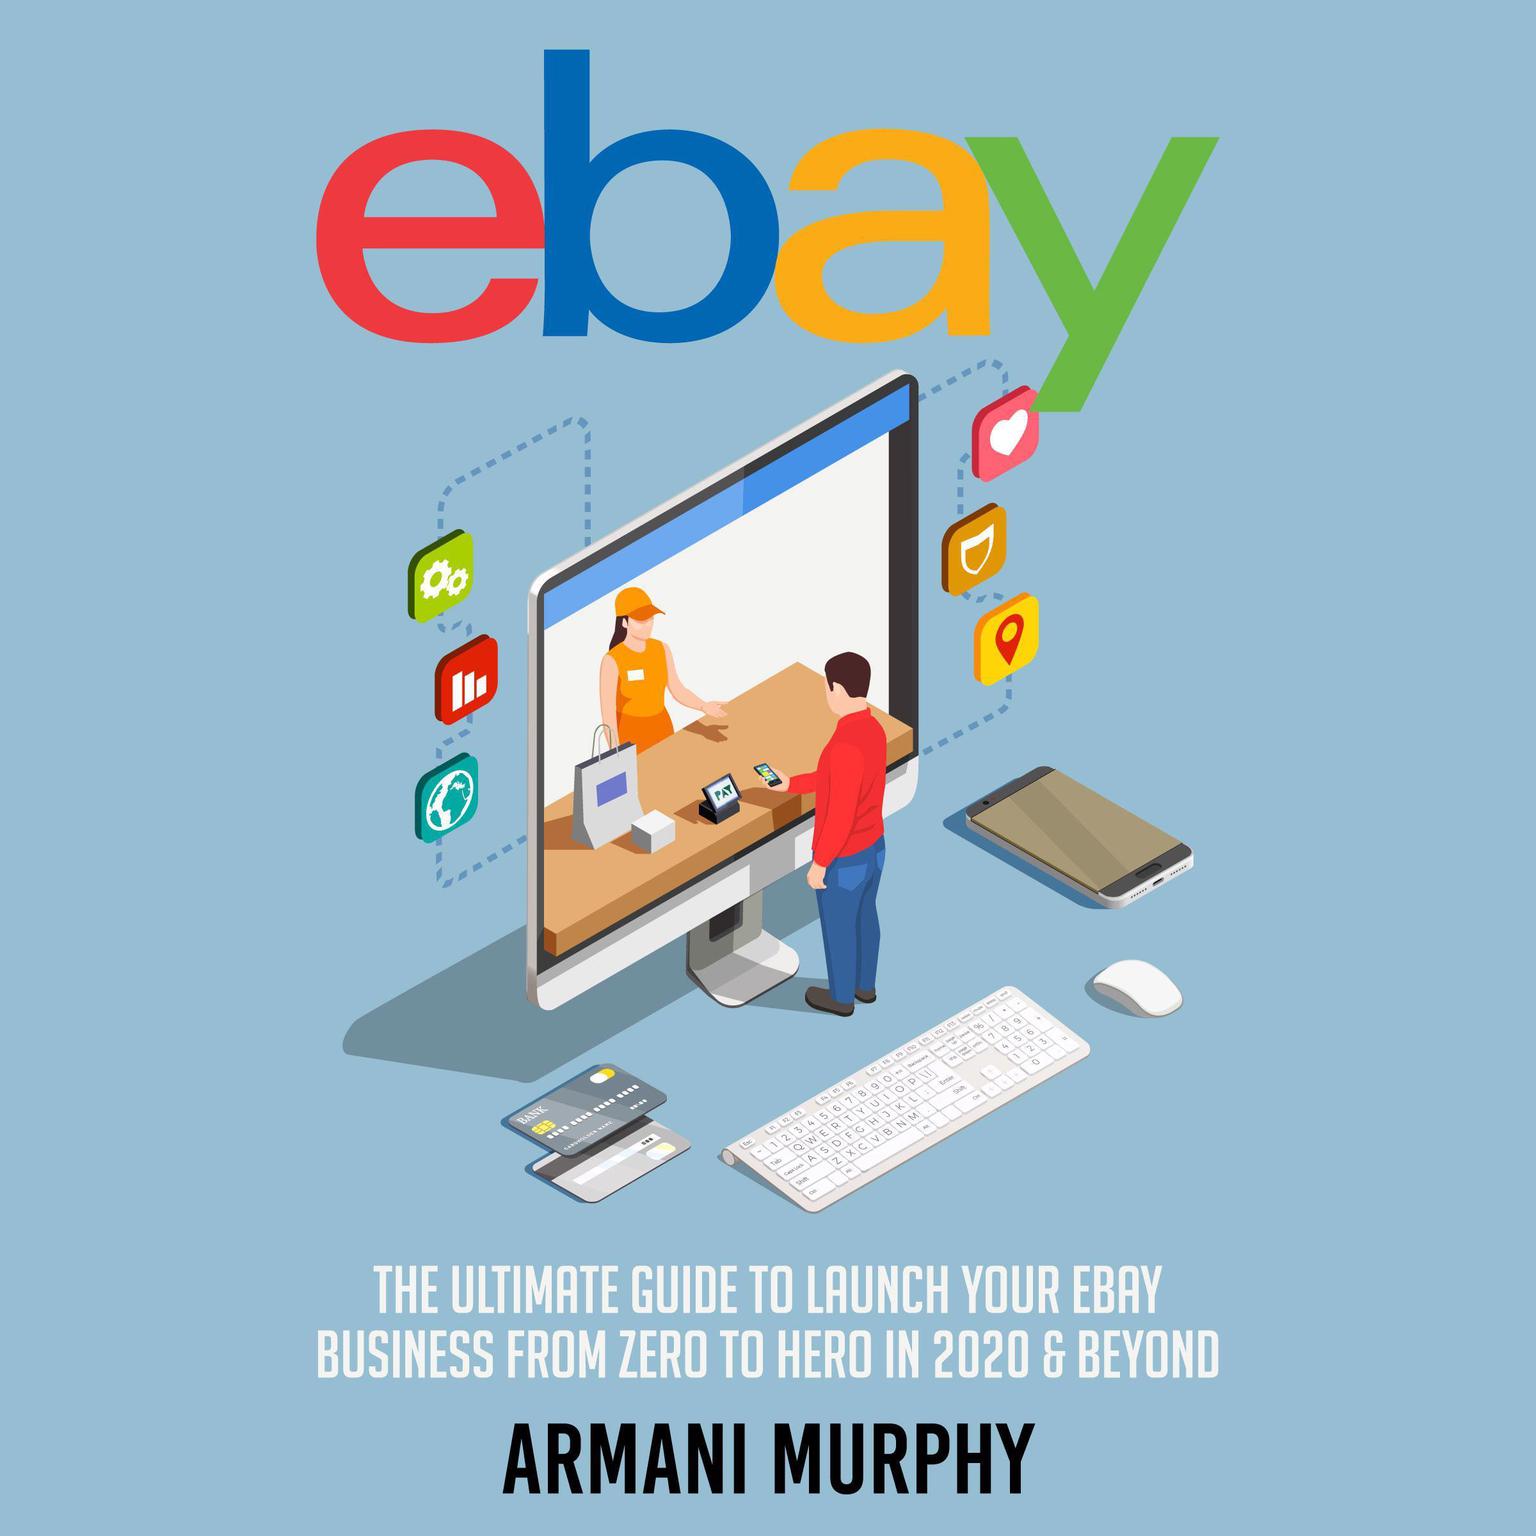 Ebay: The Ultimate Guide to Launch Your eBay Business from Zero to Hero in 2020 & Beyond Audiobook, by Armani Murphy